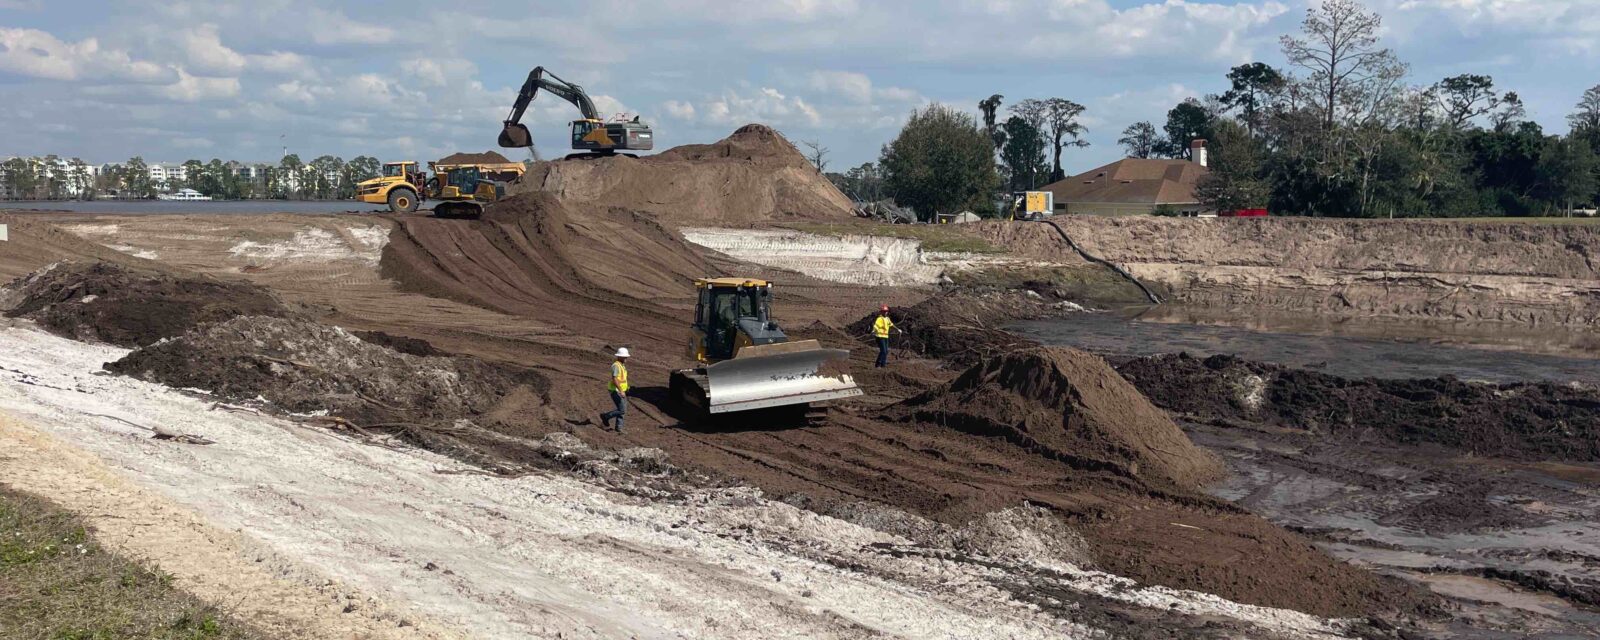 Mound of dirt and construction from Daryl-Carter Pond project site.